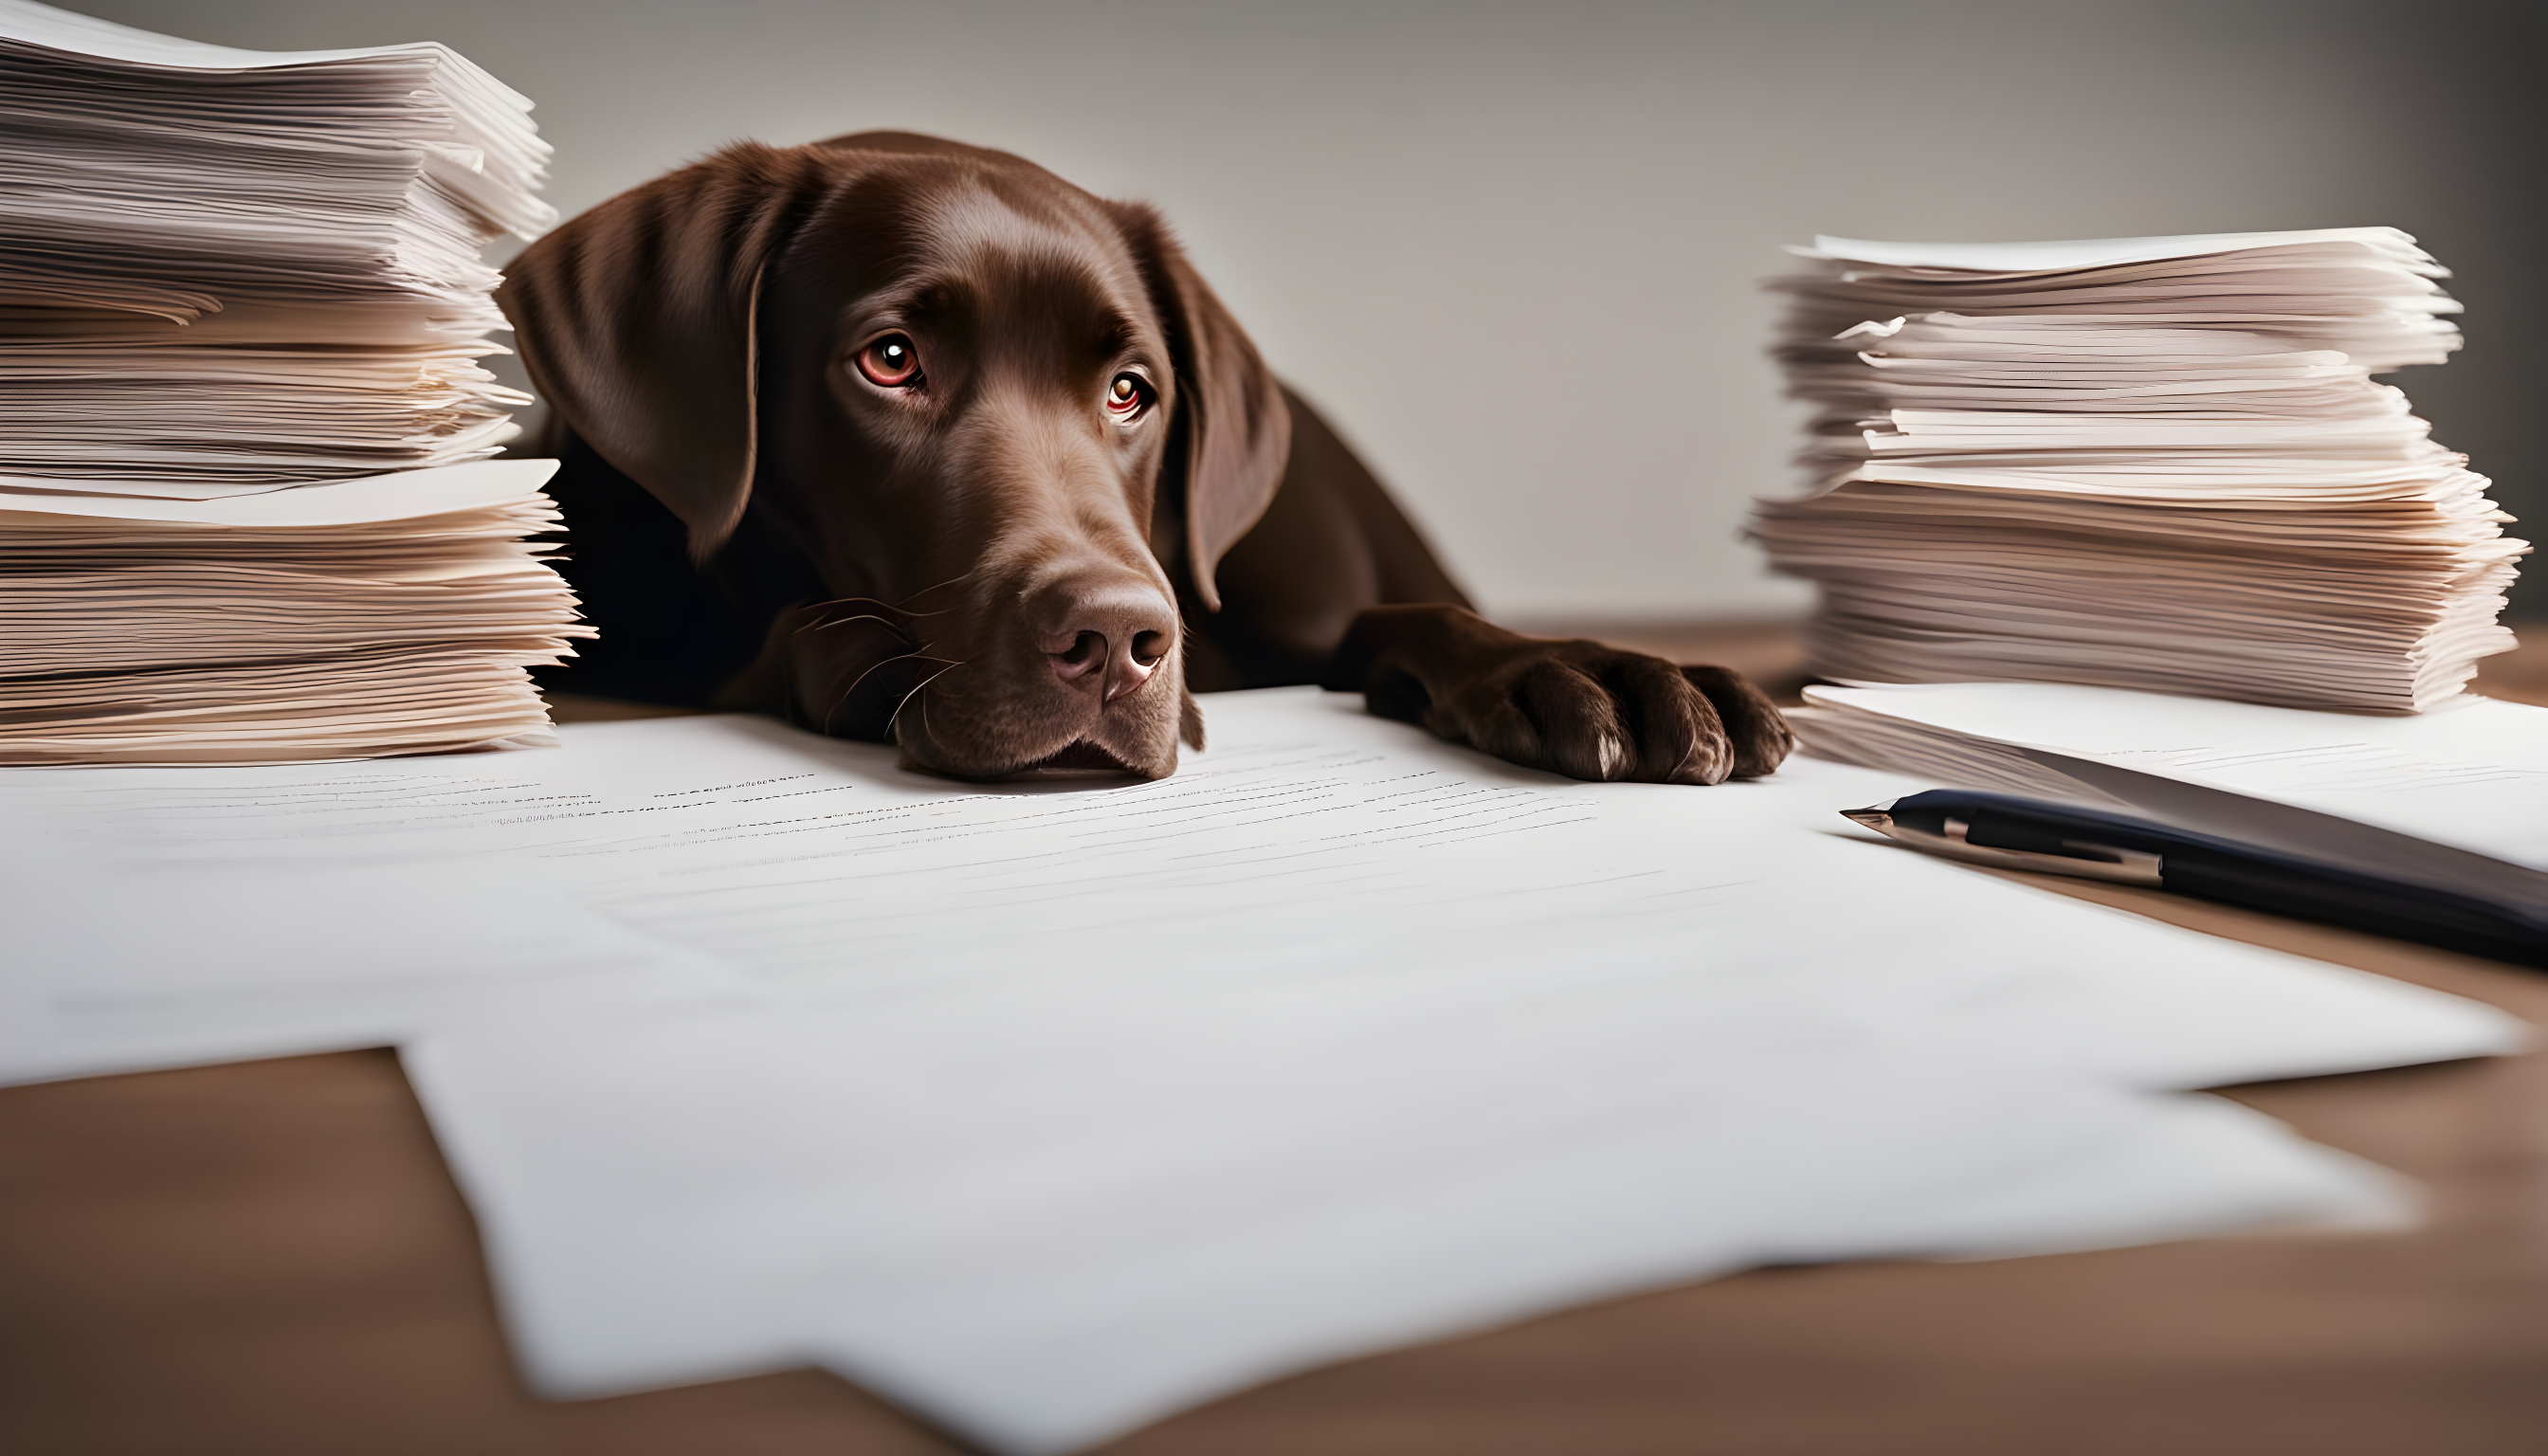 A chocolate lab sitting next to a pile of adoption paperwork, signifying the beginning of a new chapter filled with love and care